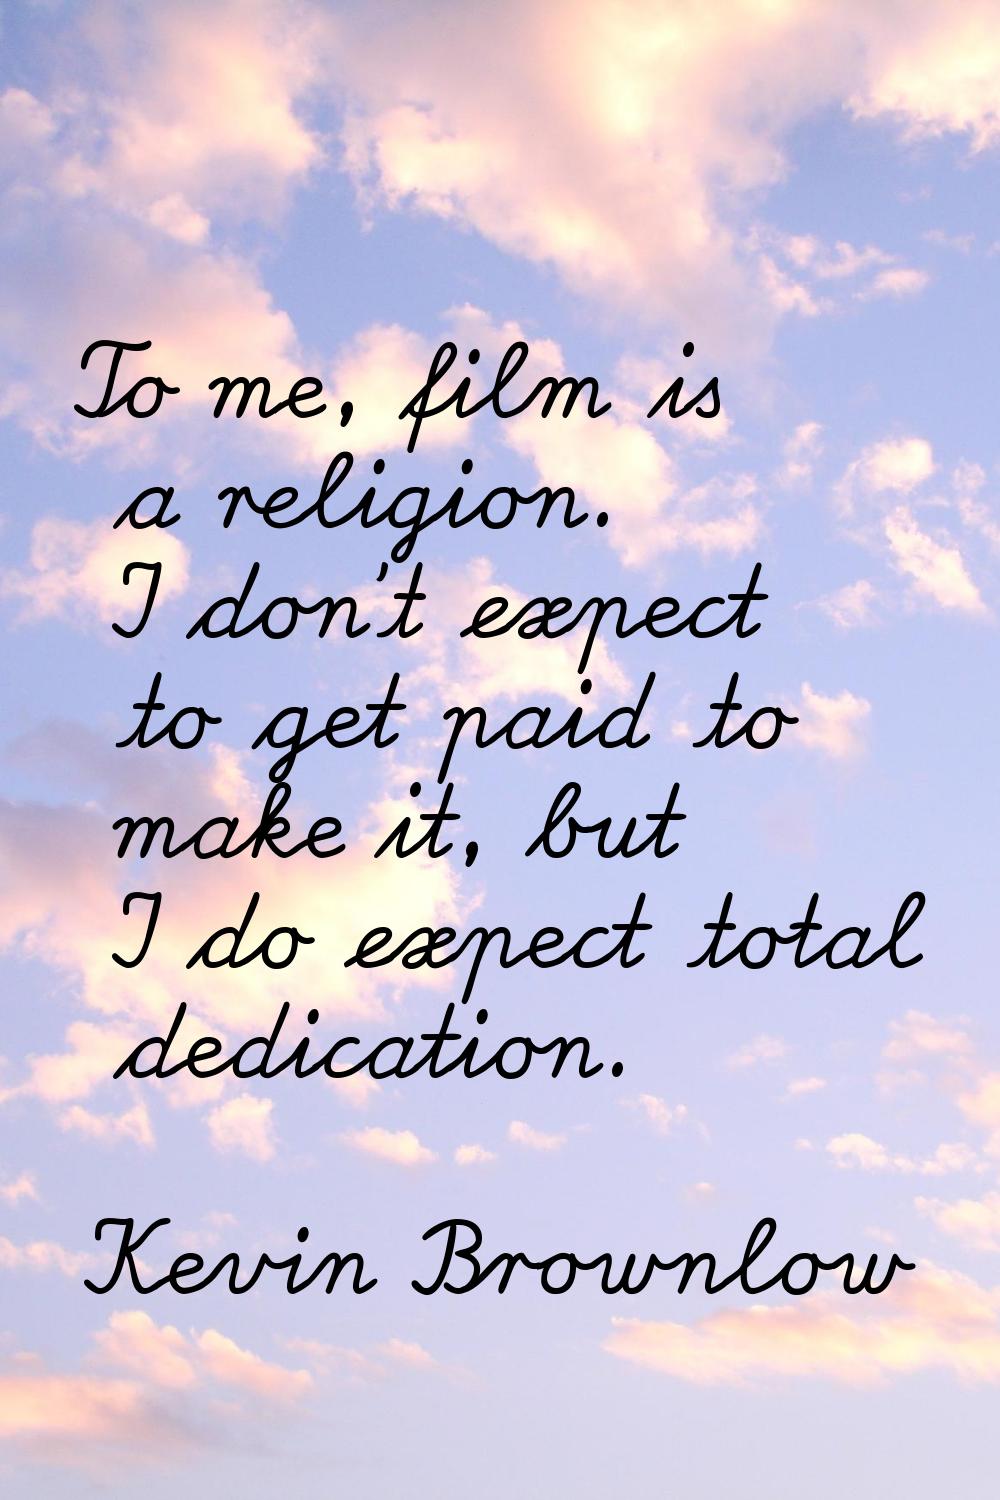 To me, film is a religion. I don't expect to get paid to make it, but I do expect total dedication.